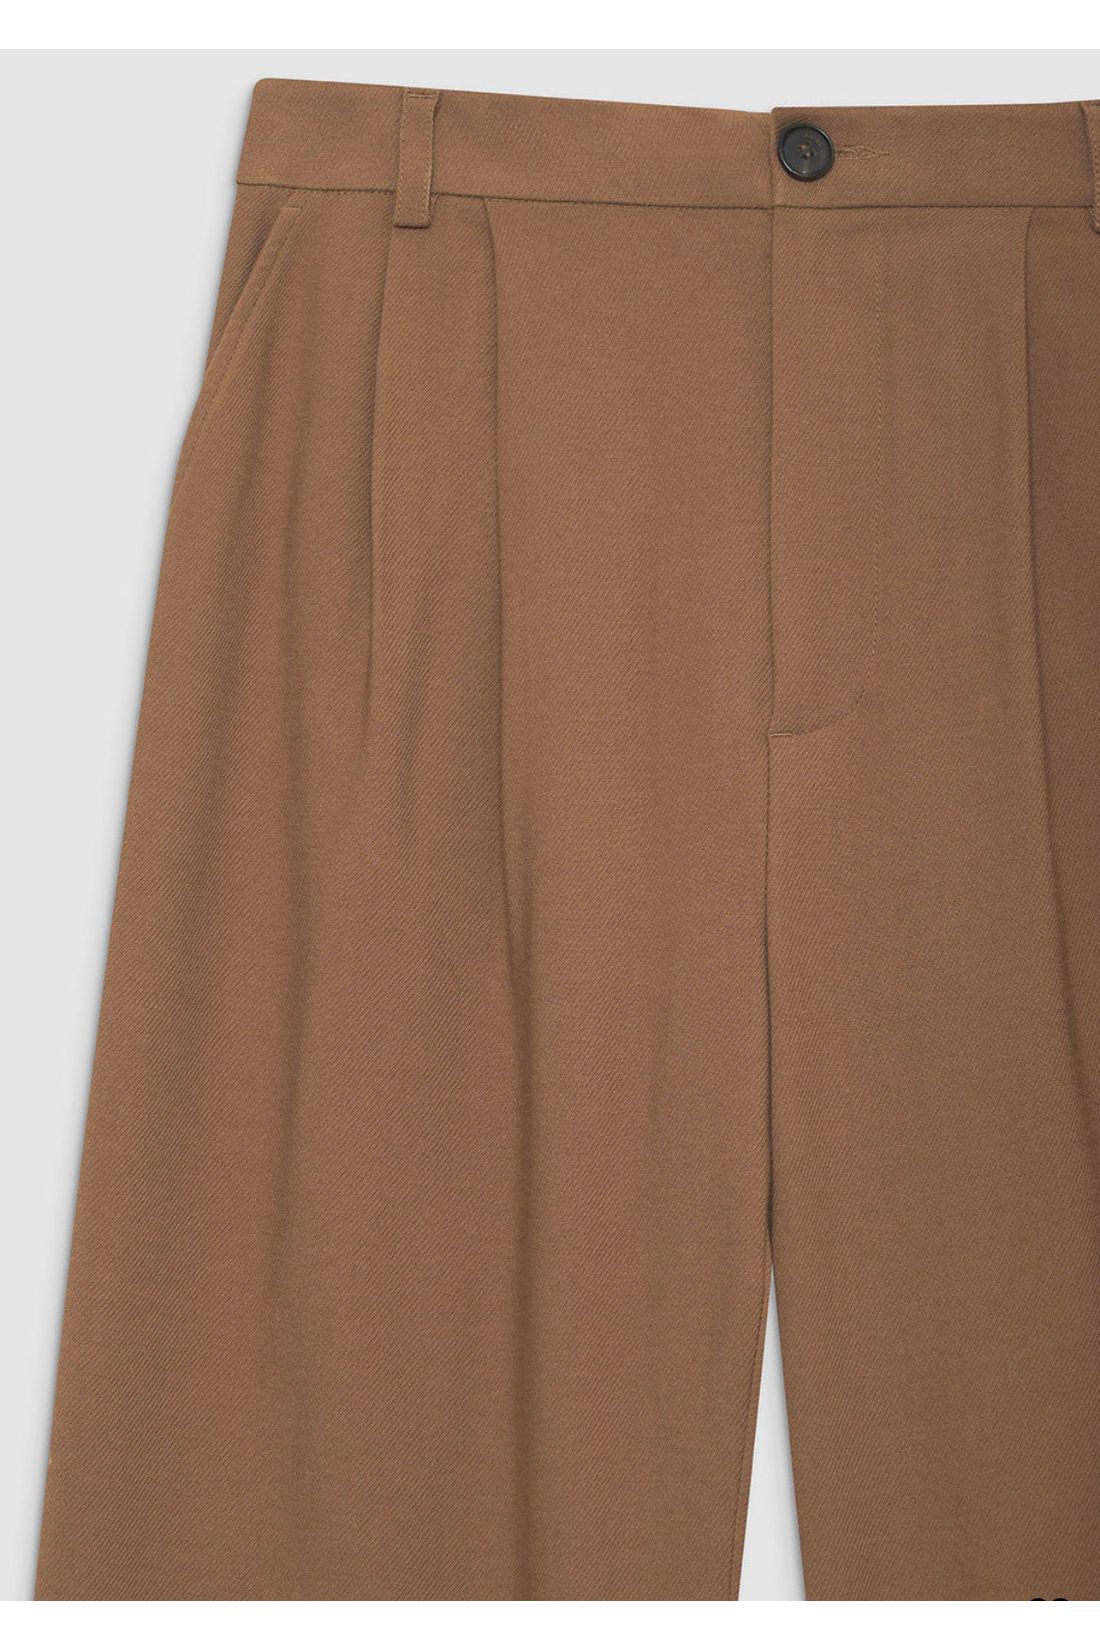 Carrie Pant in Camel Twill by Anine Bing